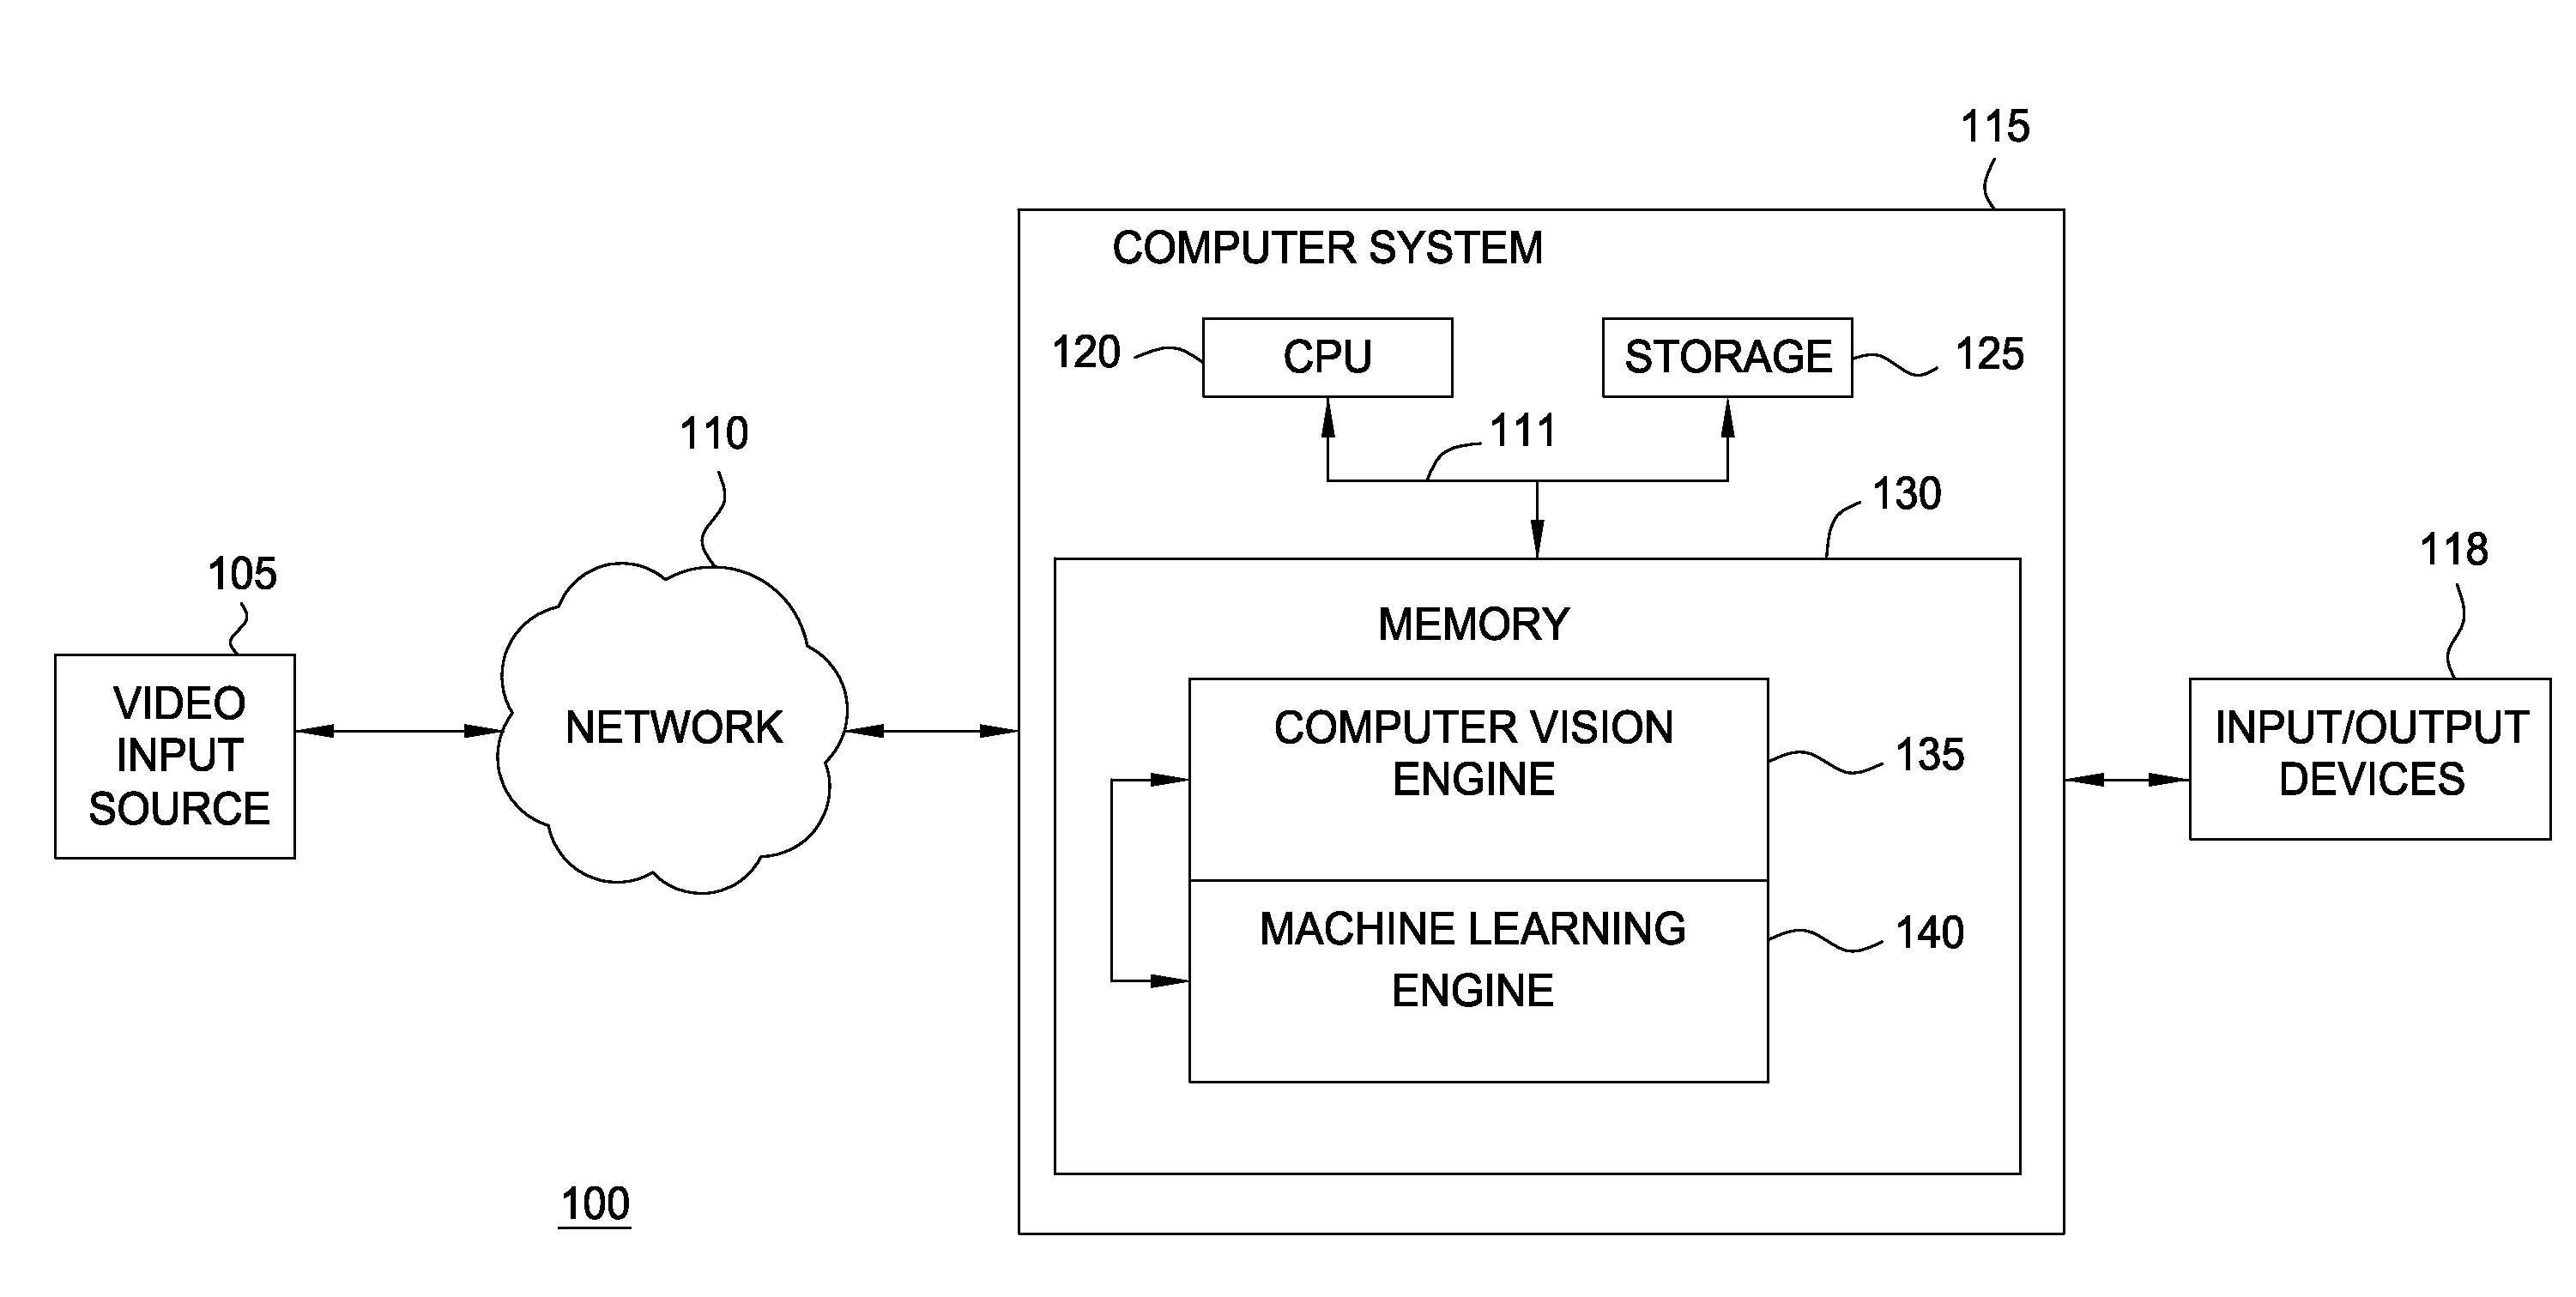 Long-term memory in a video analysis system